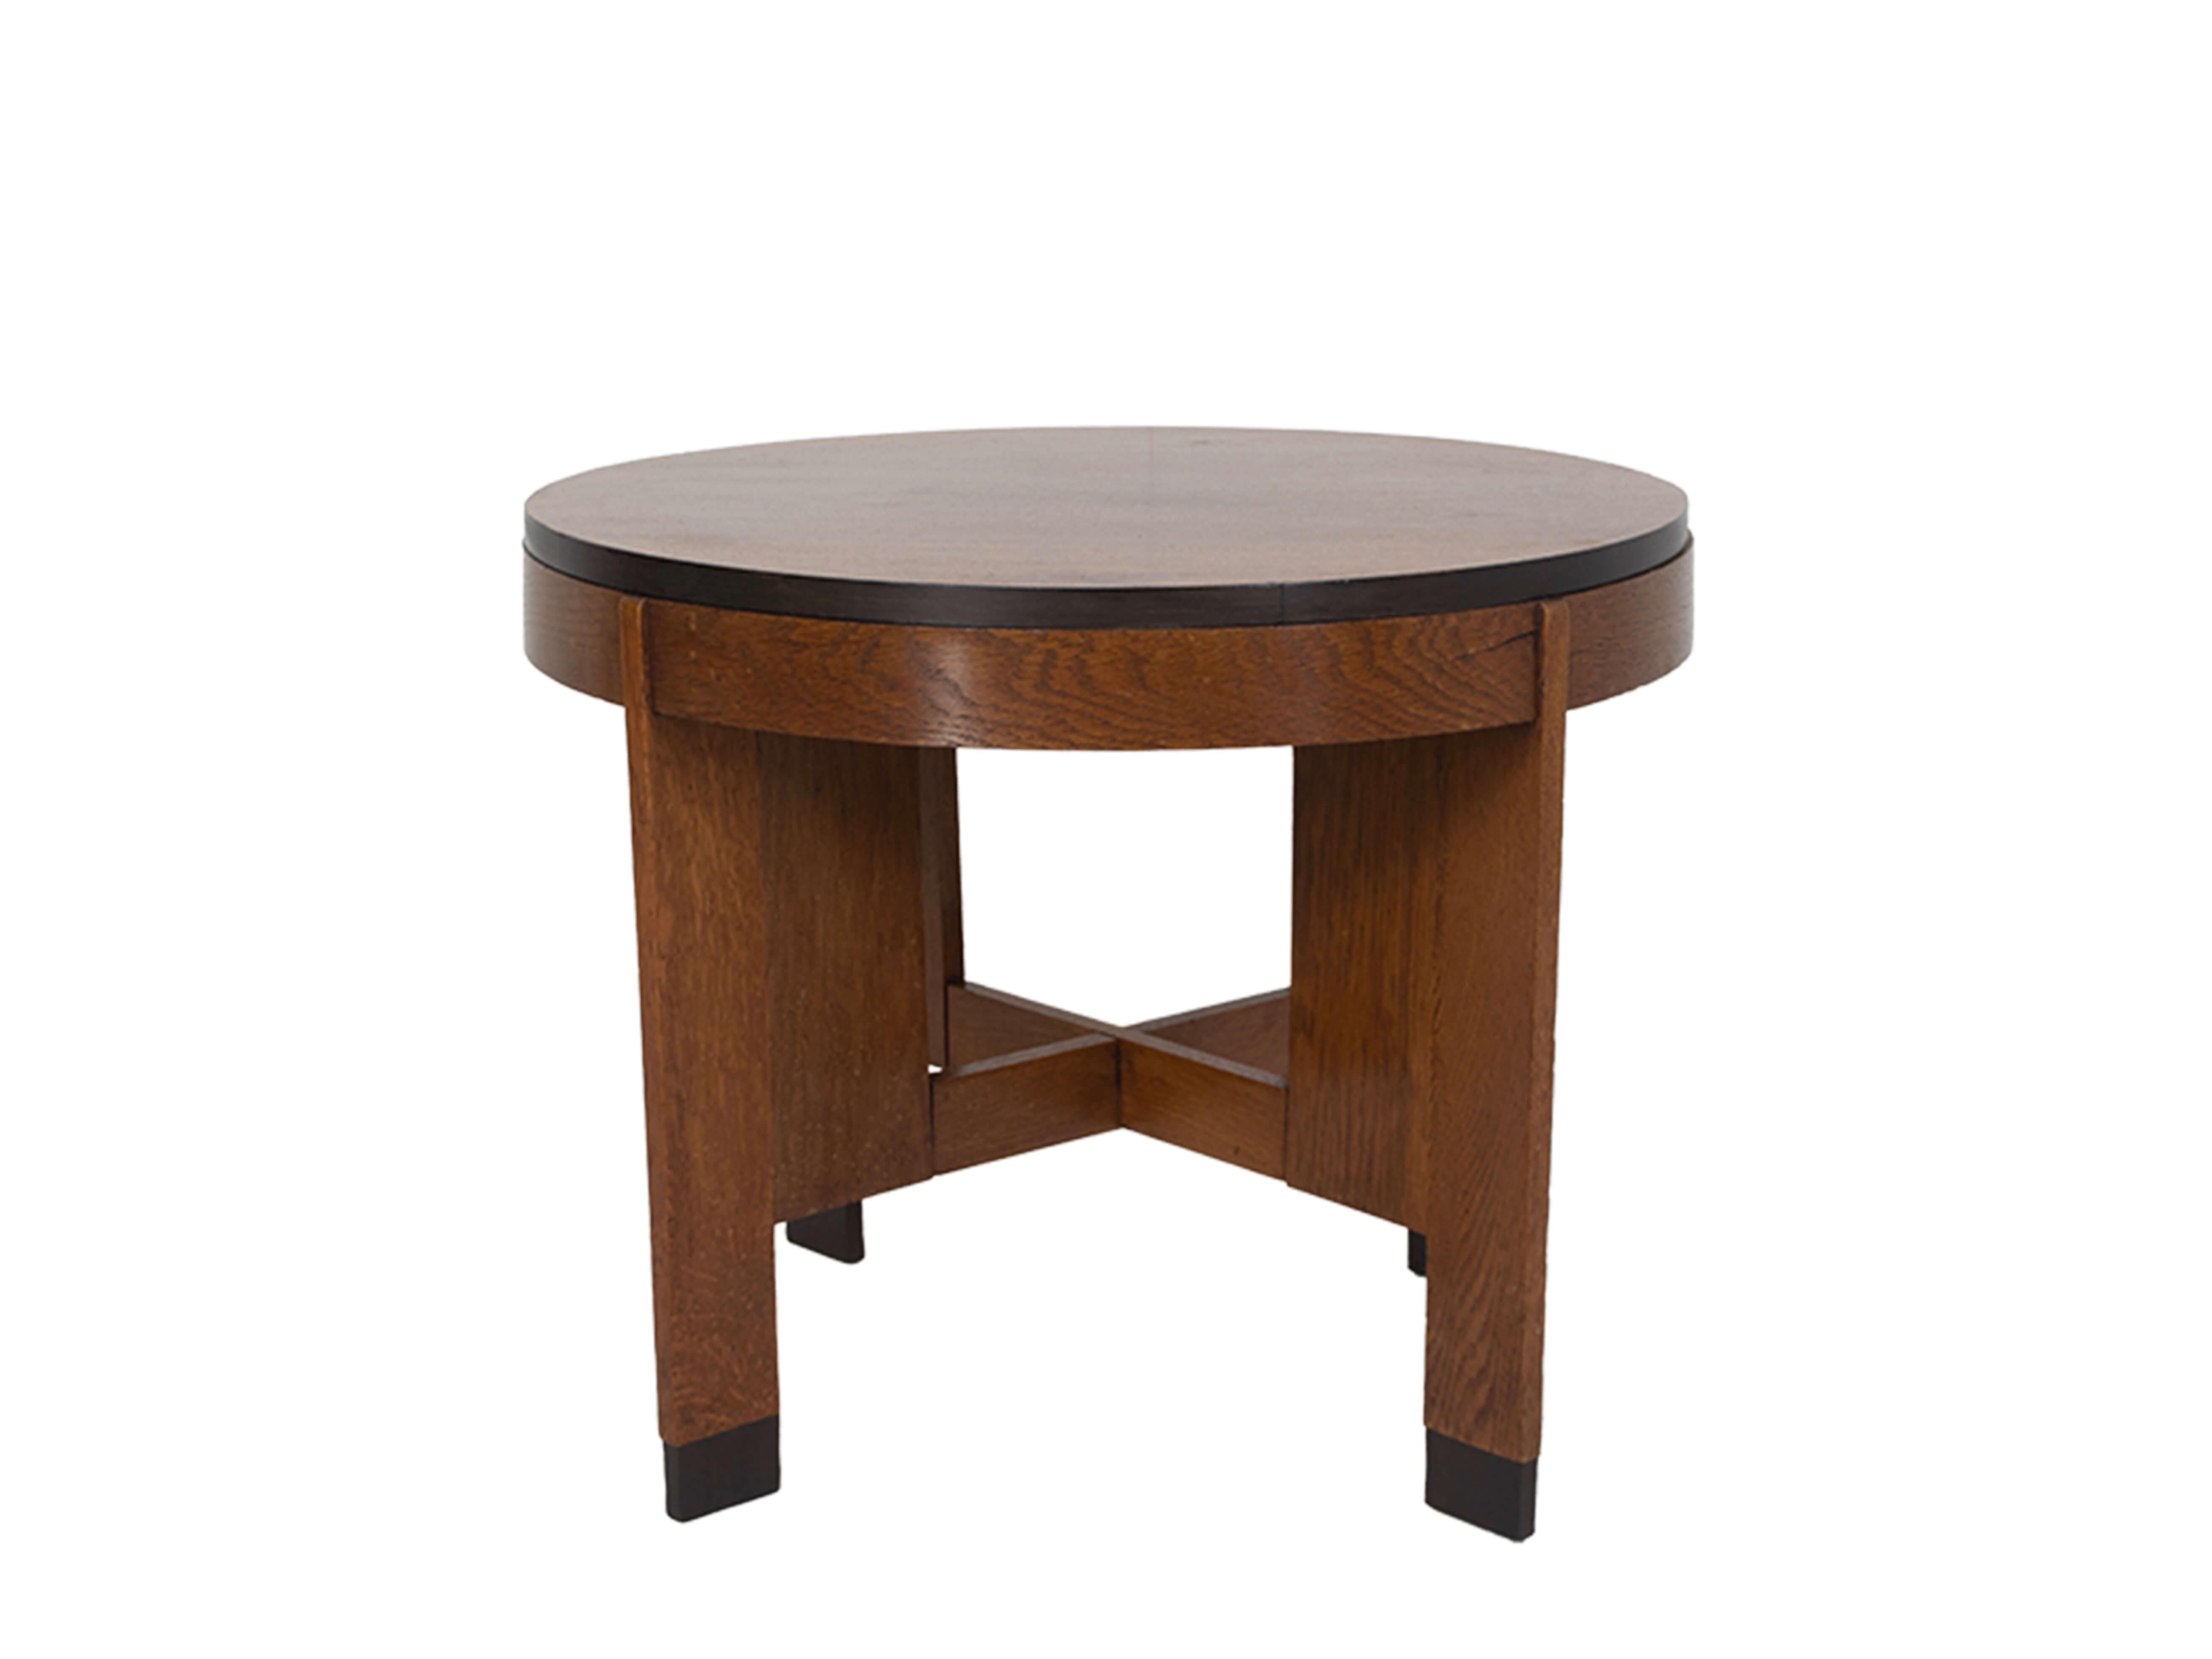 Nice Art Deco coffee table in Amsterdam School style from The Netherlands, 1930s. This table is made of oak, very functional and has an attractive shape. The lines of the feet are impressive and give the table another look everytime you look at it.